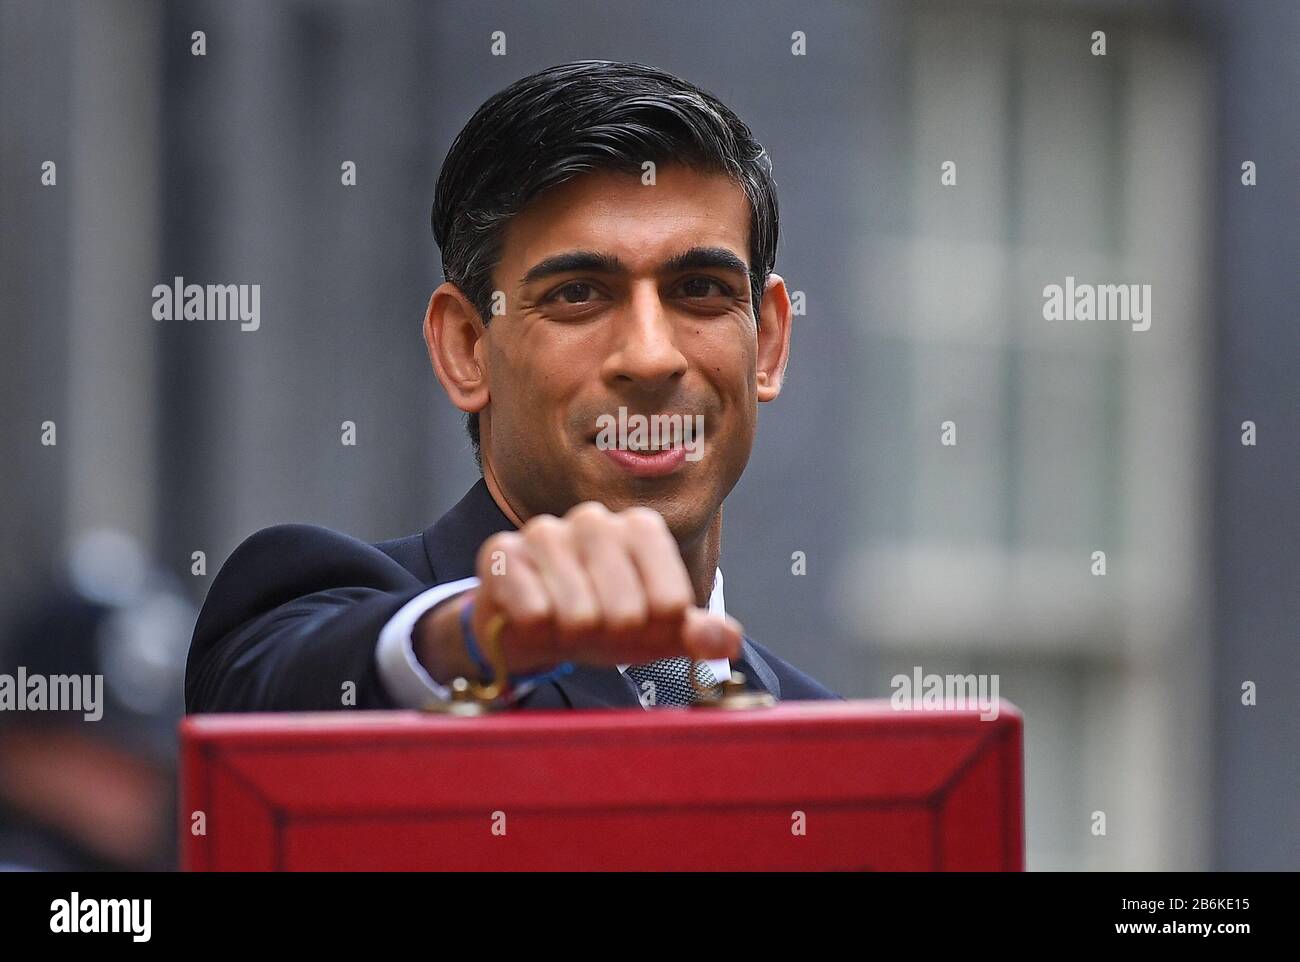 Chancellor Rishi Sunak outside 11 Downing Street, London, before heading to the House of Commons to deliver his Budget. Stock Photo